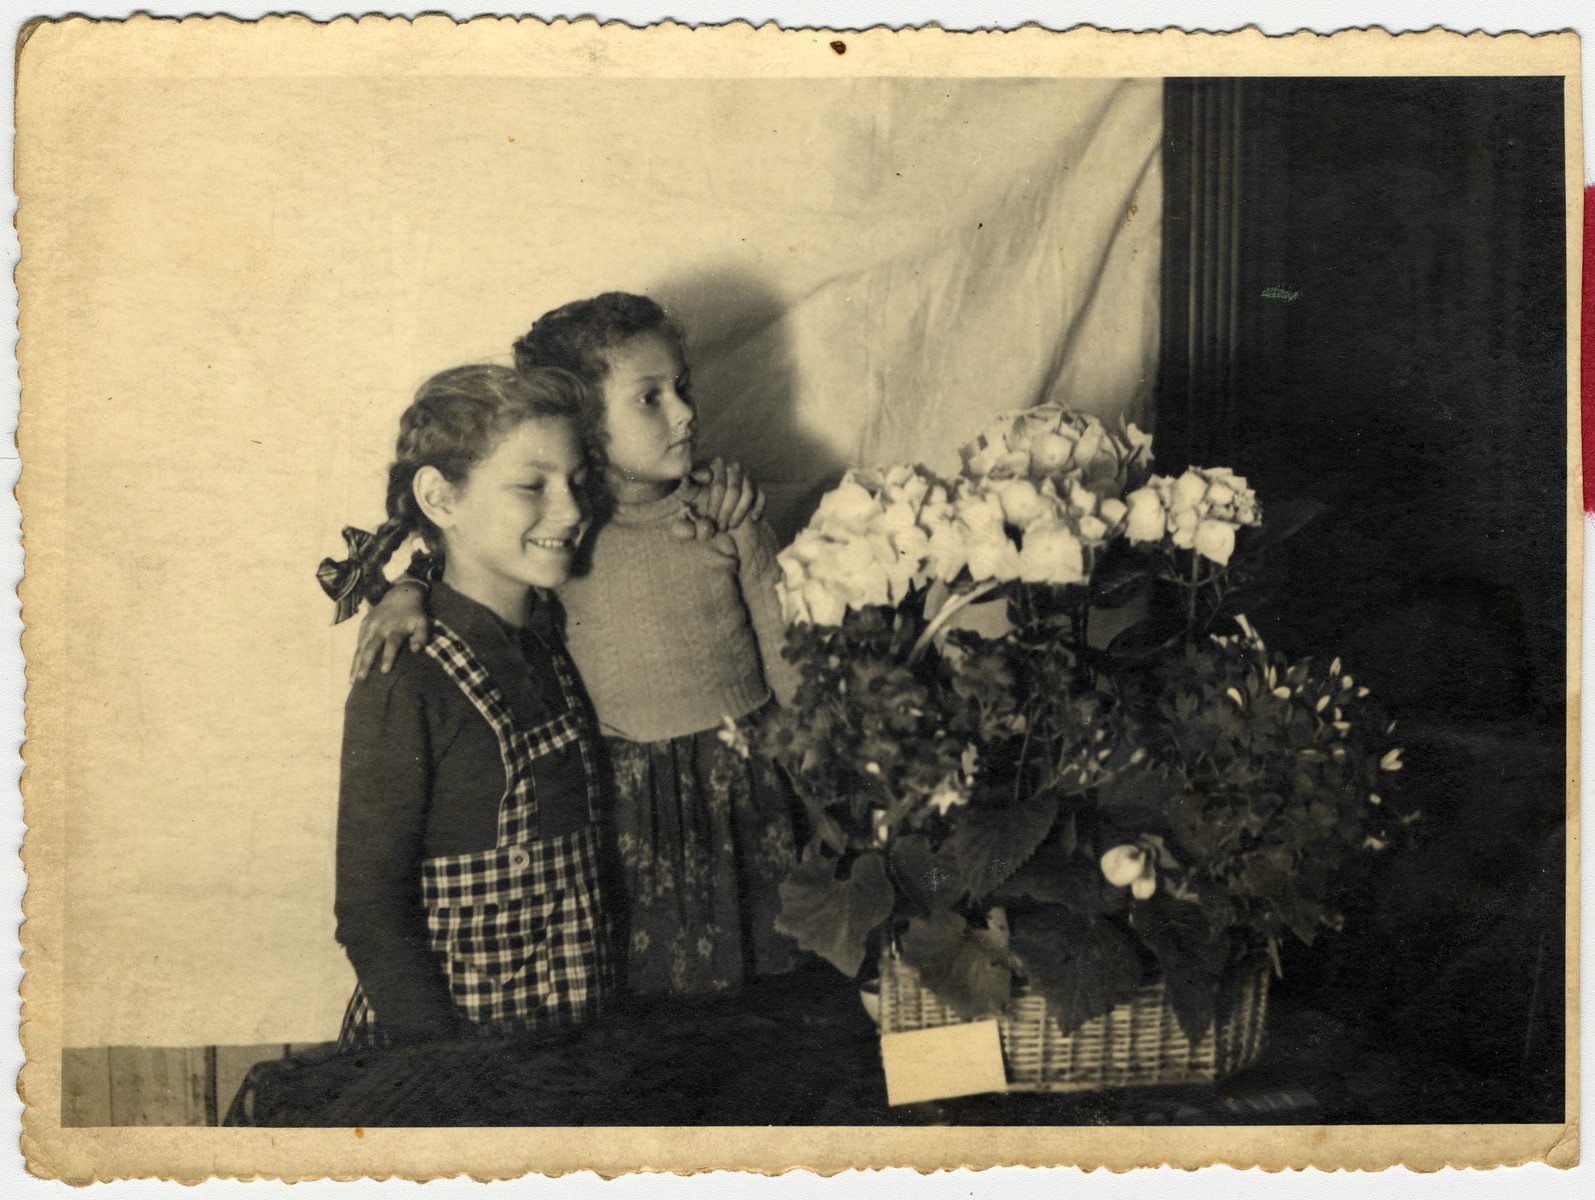 Sisters Halina  and Eva Litman pose next to a basket of flowers while in hiding in Jaroslaw. 

Eva is standing on a chair so they appear to be the same height.